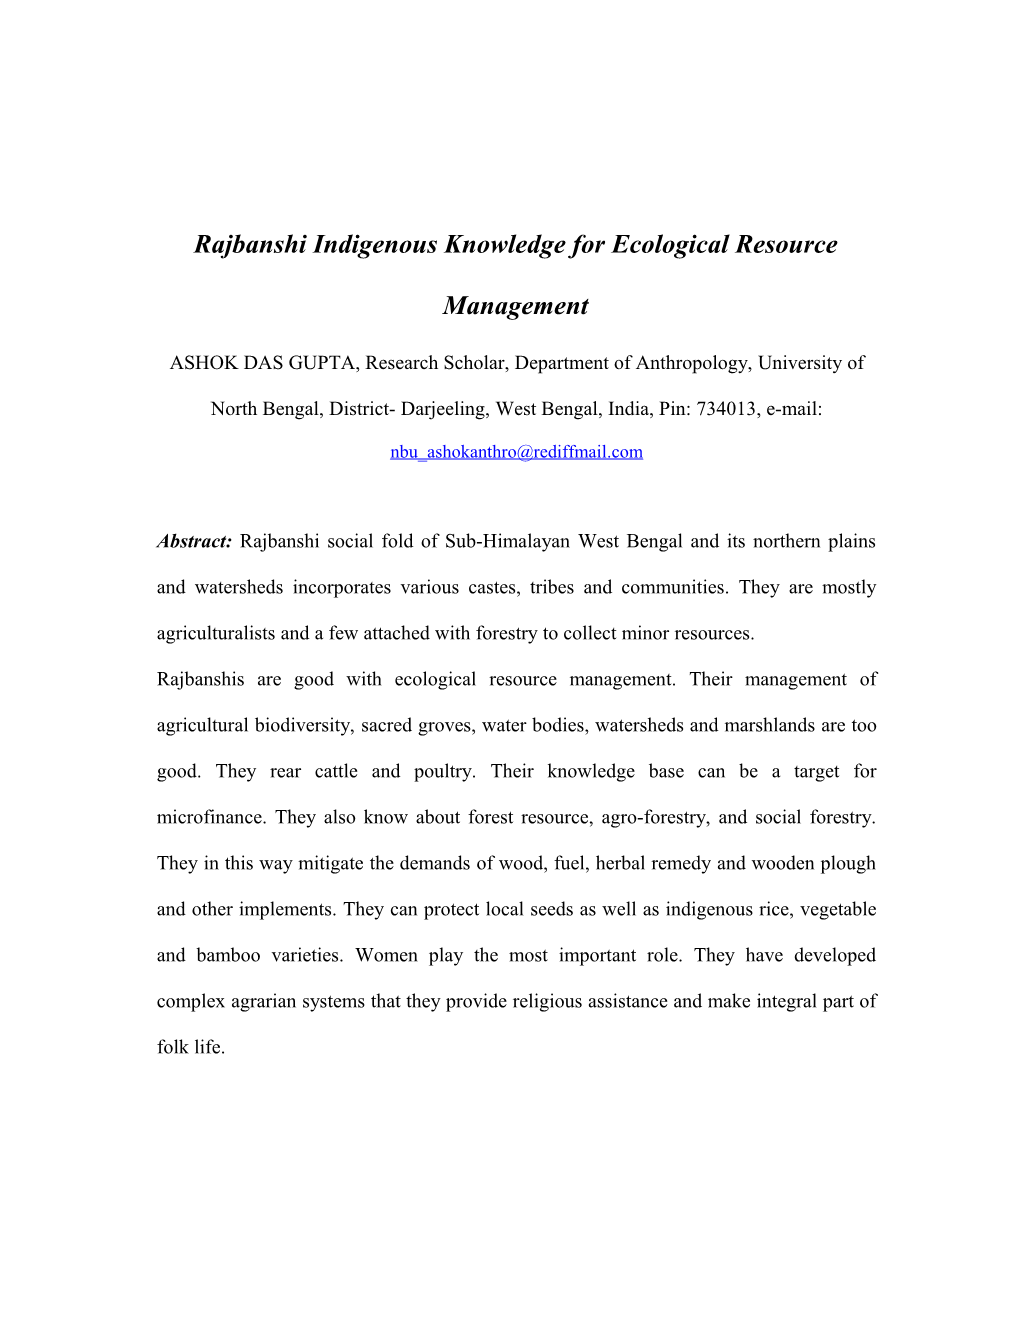 Indigenous Knowledge System in Service to Biodiversity Management: a Special Reference to Major Crop Cultivation by Rajbansi P